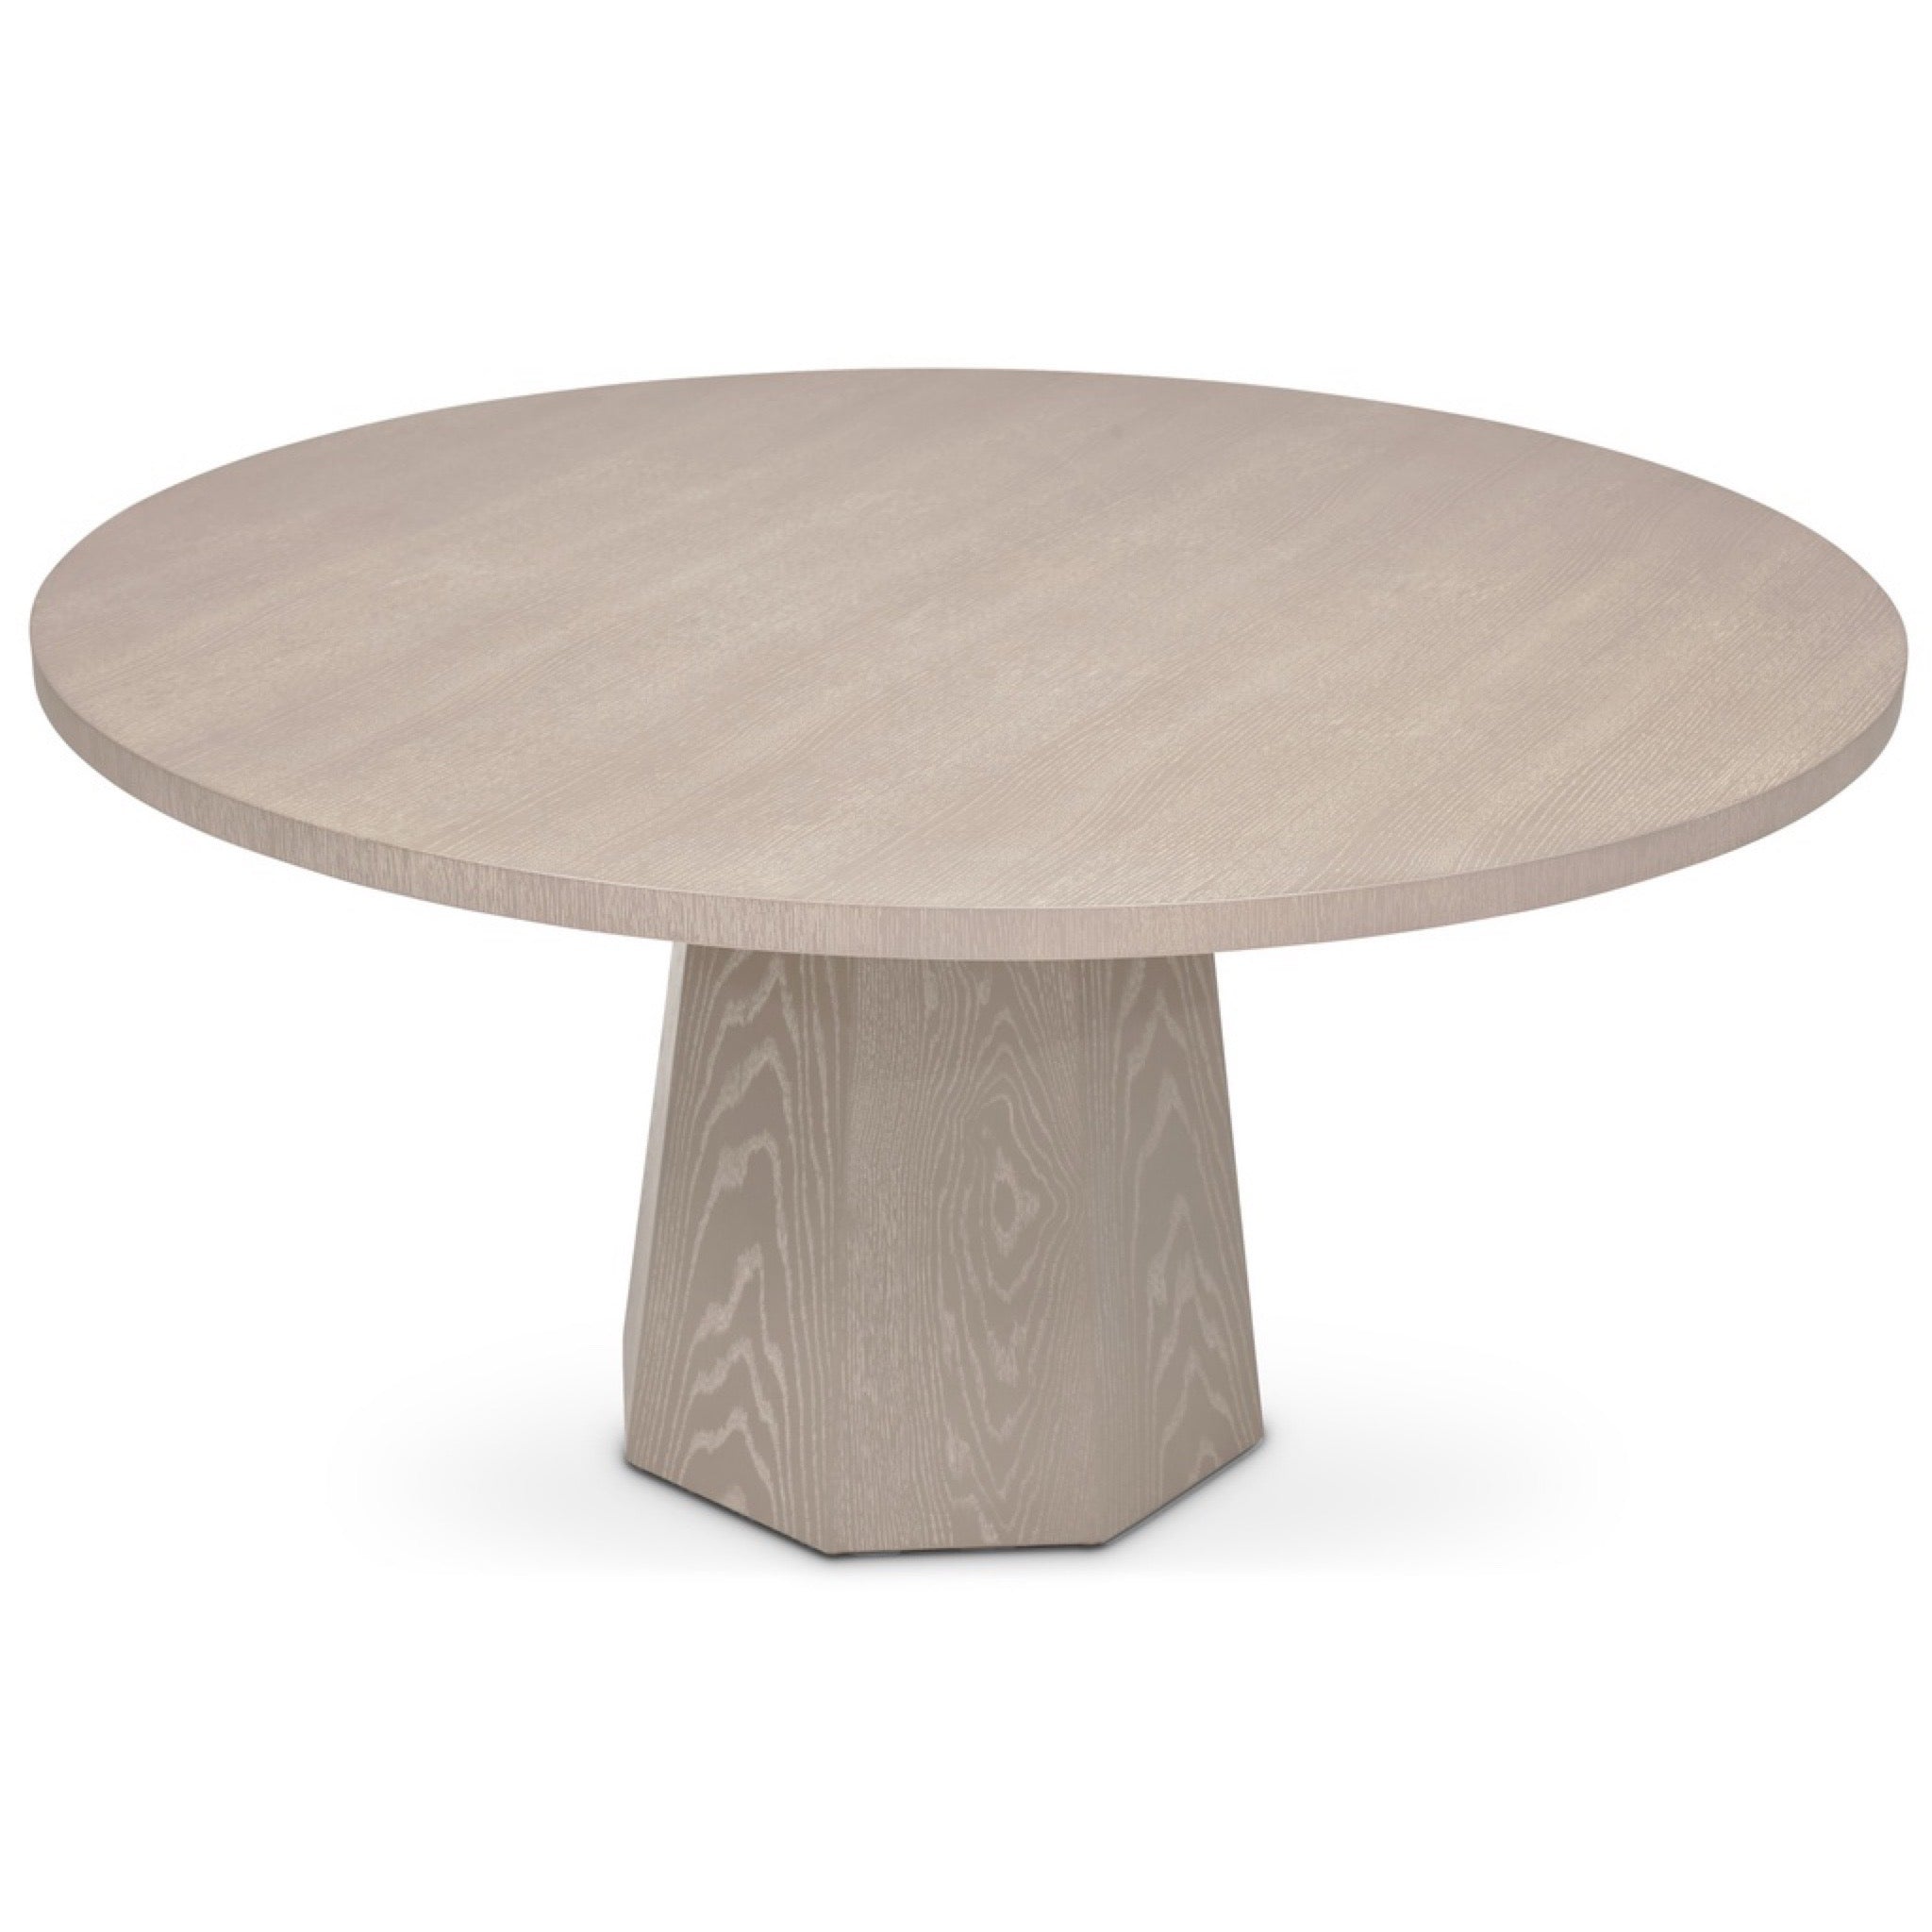 KAIA ROUND DINING TABLE - PUTTY GREY